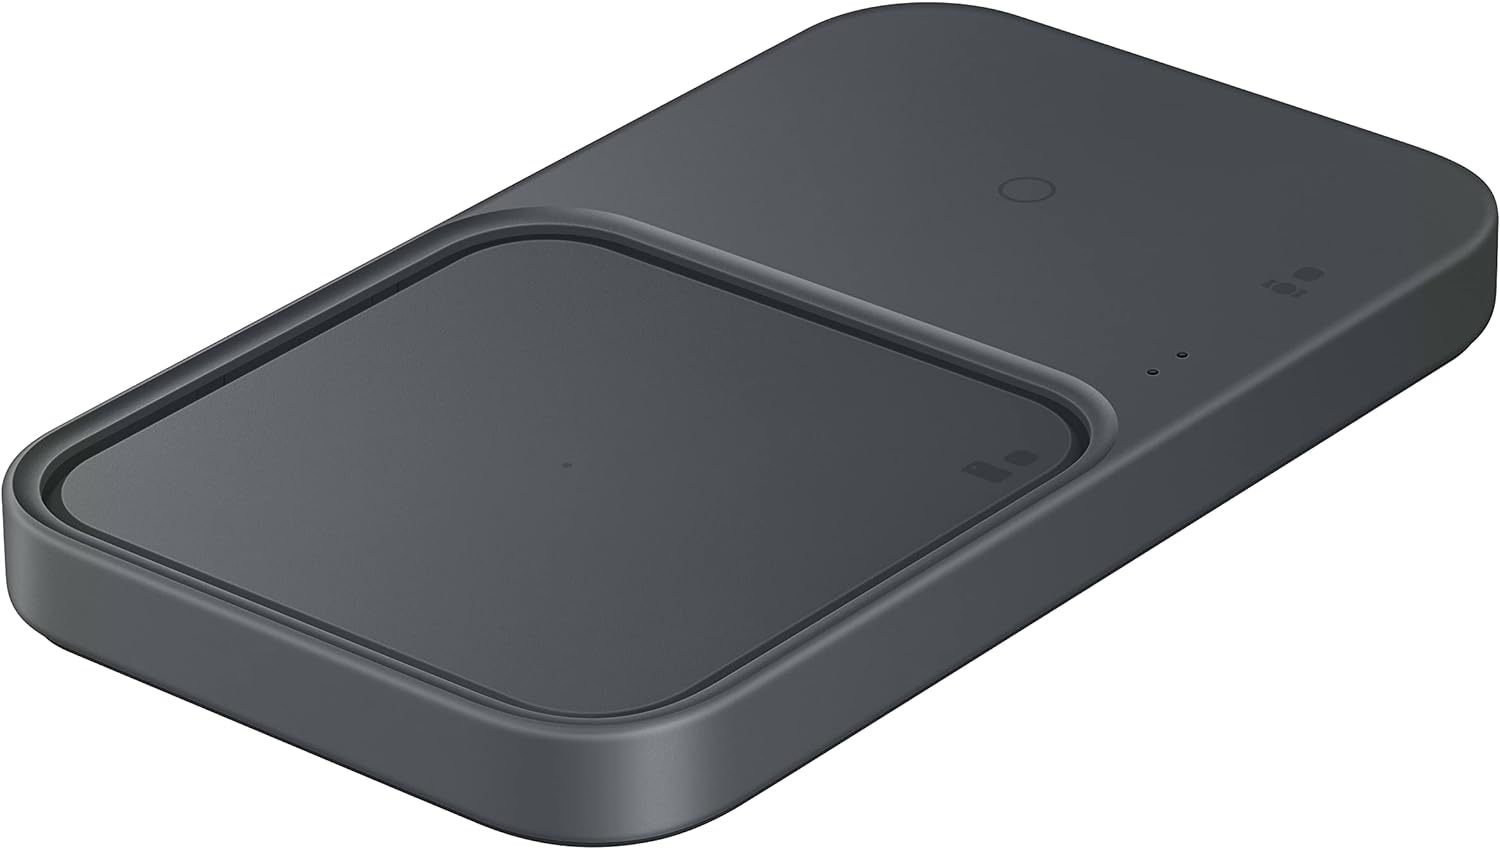 Samsung 15W Duo Fast Wireless Charger Pad - Dark Gray (New)